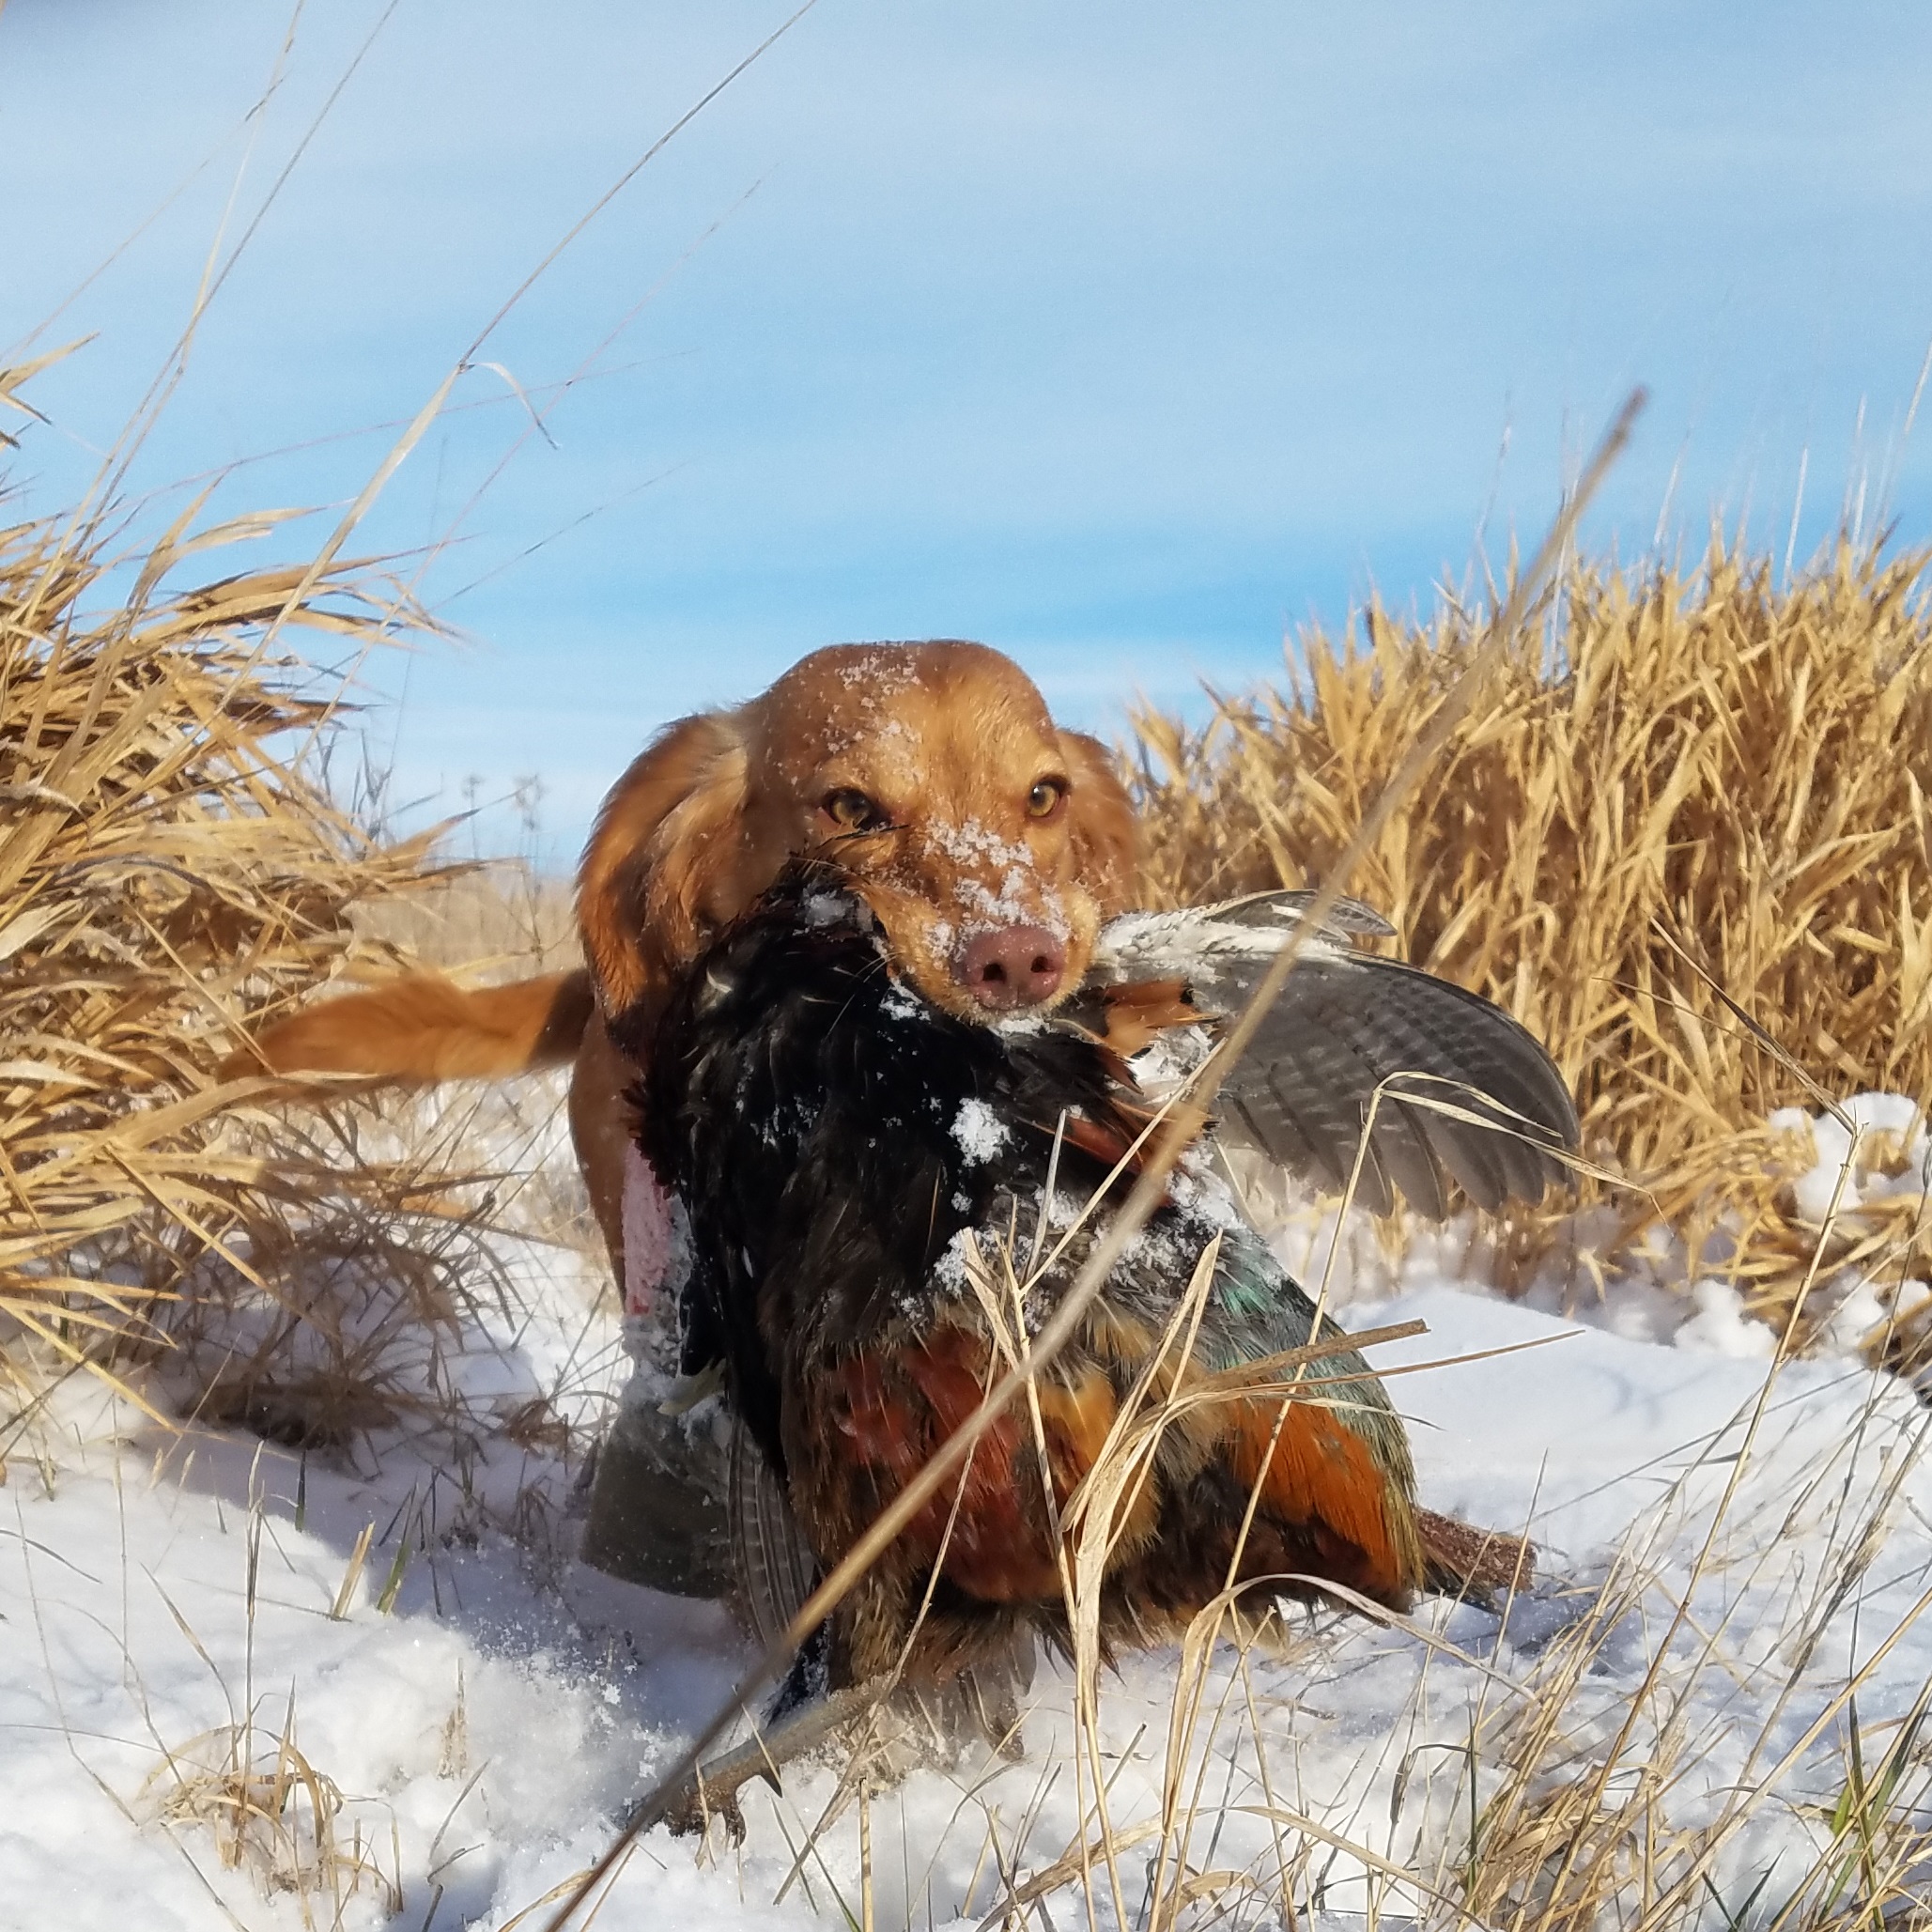  <h2>Iowa Snow Birds</h2>English cocker spaniel, "Ruth," and her owner, Pheasants Forever Life Member Anthony Hauck, made the most of Iowa's first snowfall of the year!<br />
<br />
"It was a magical day," reported Hauck. "Tight holding birds, phenomenal dog work, and good shooting made it a memory to last a lifetime."